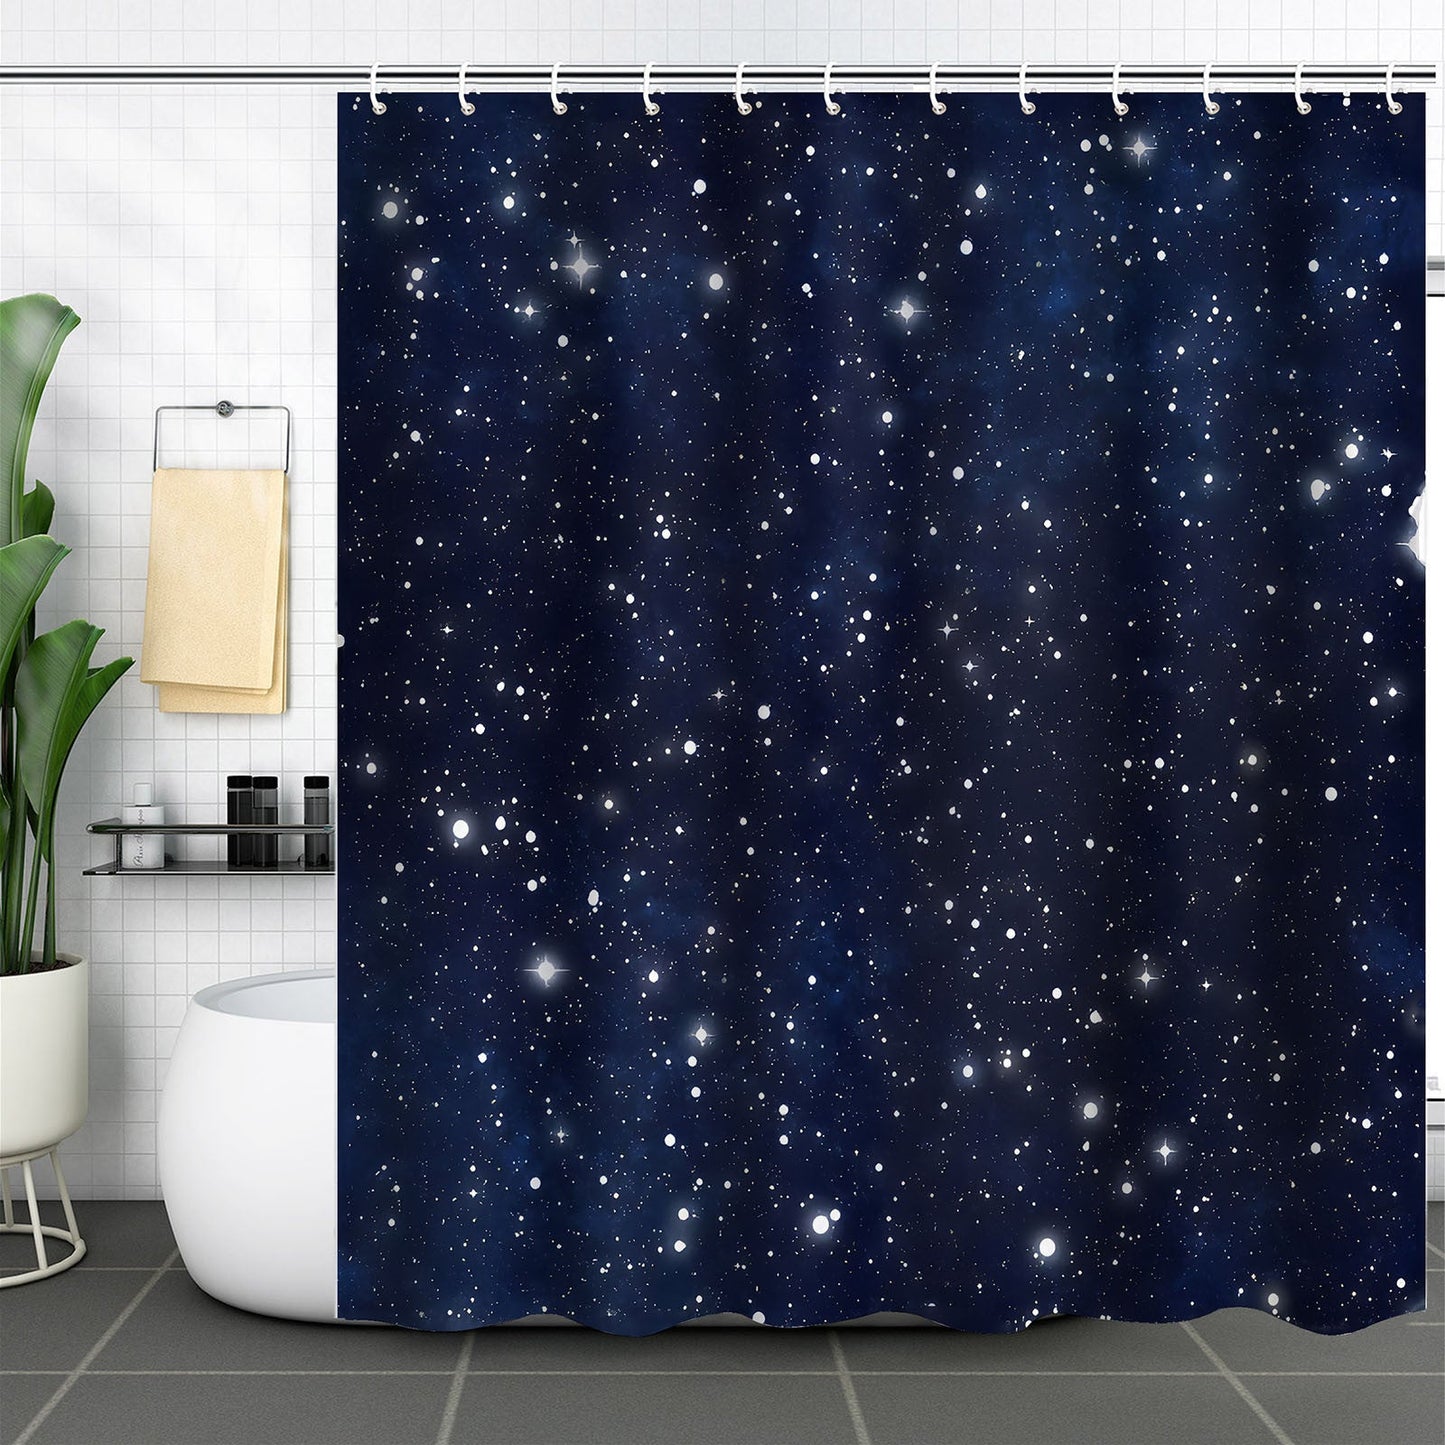 70x70 Inch Heavy Duty Fabric Blue Textured Celestial Space Galaxy Shower Curtain Set With Hooks | Decor Gifts and More